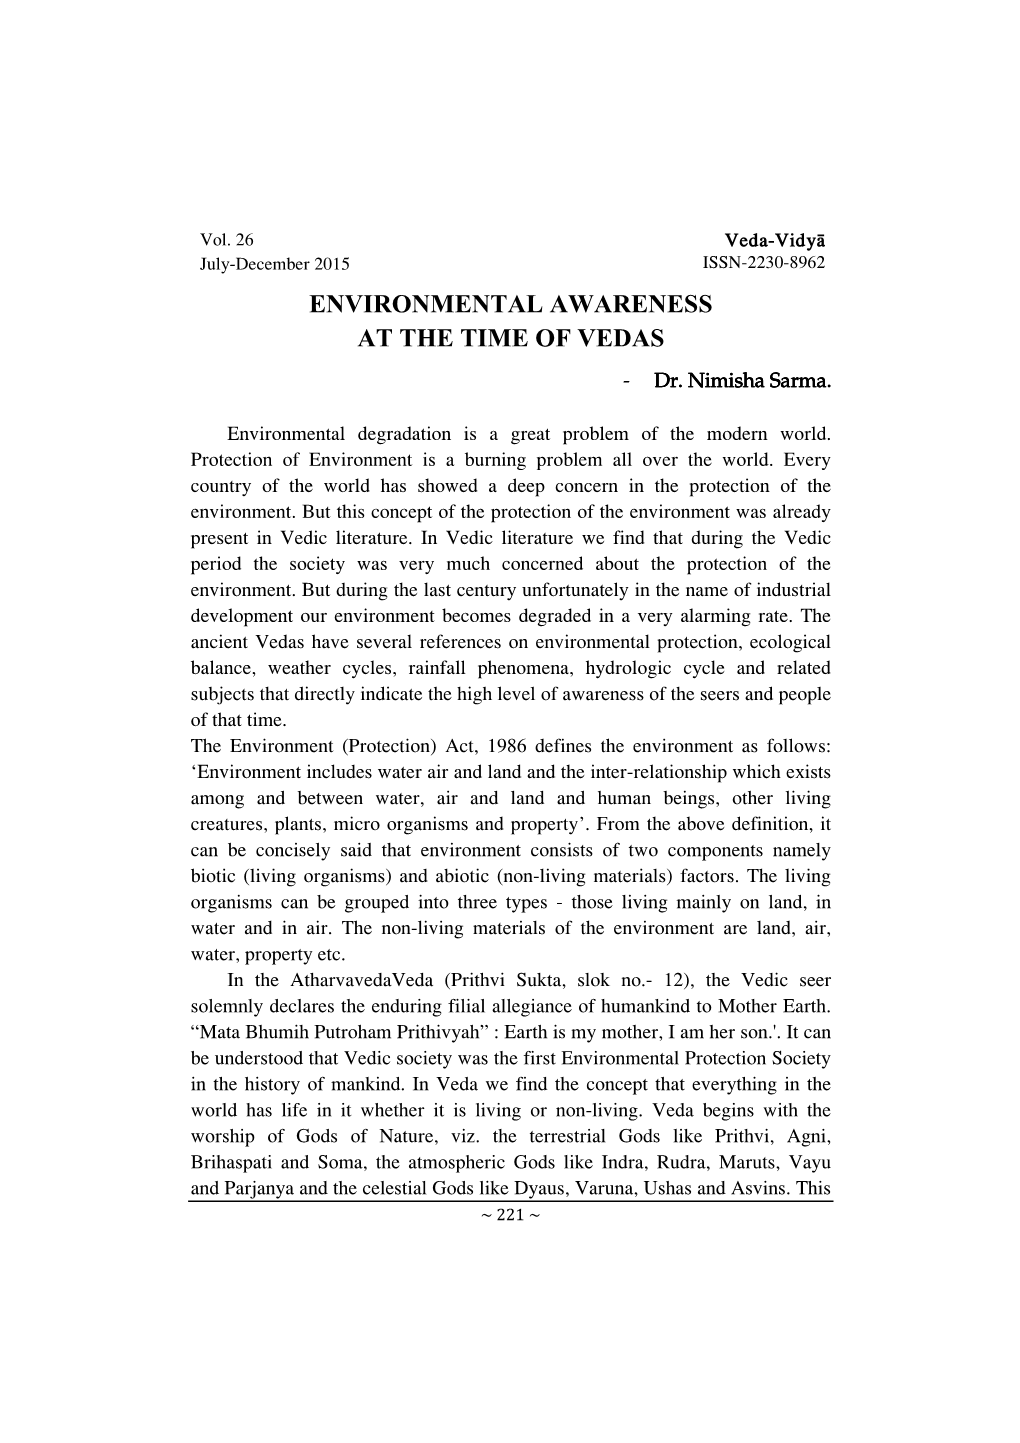 ENVIRONMENTAL AWARENESS at the TIME of VEDAS - Dr